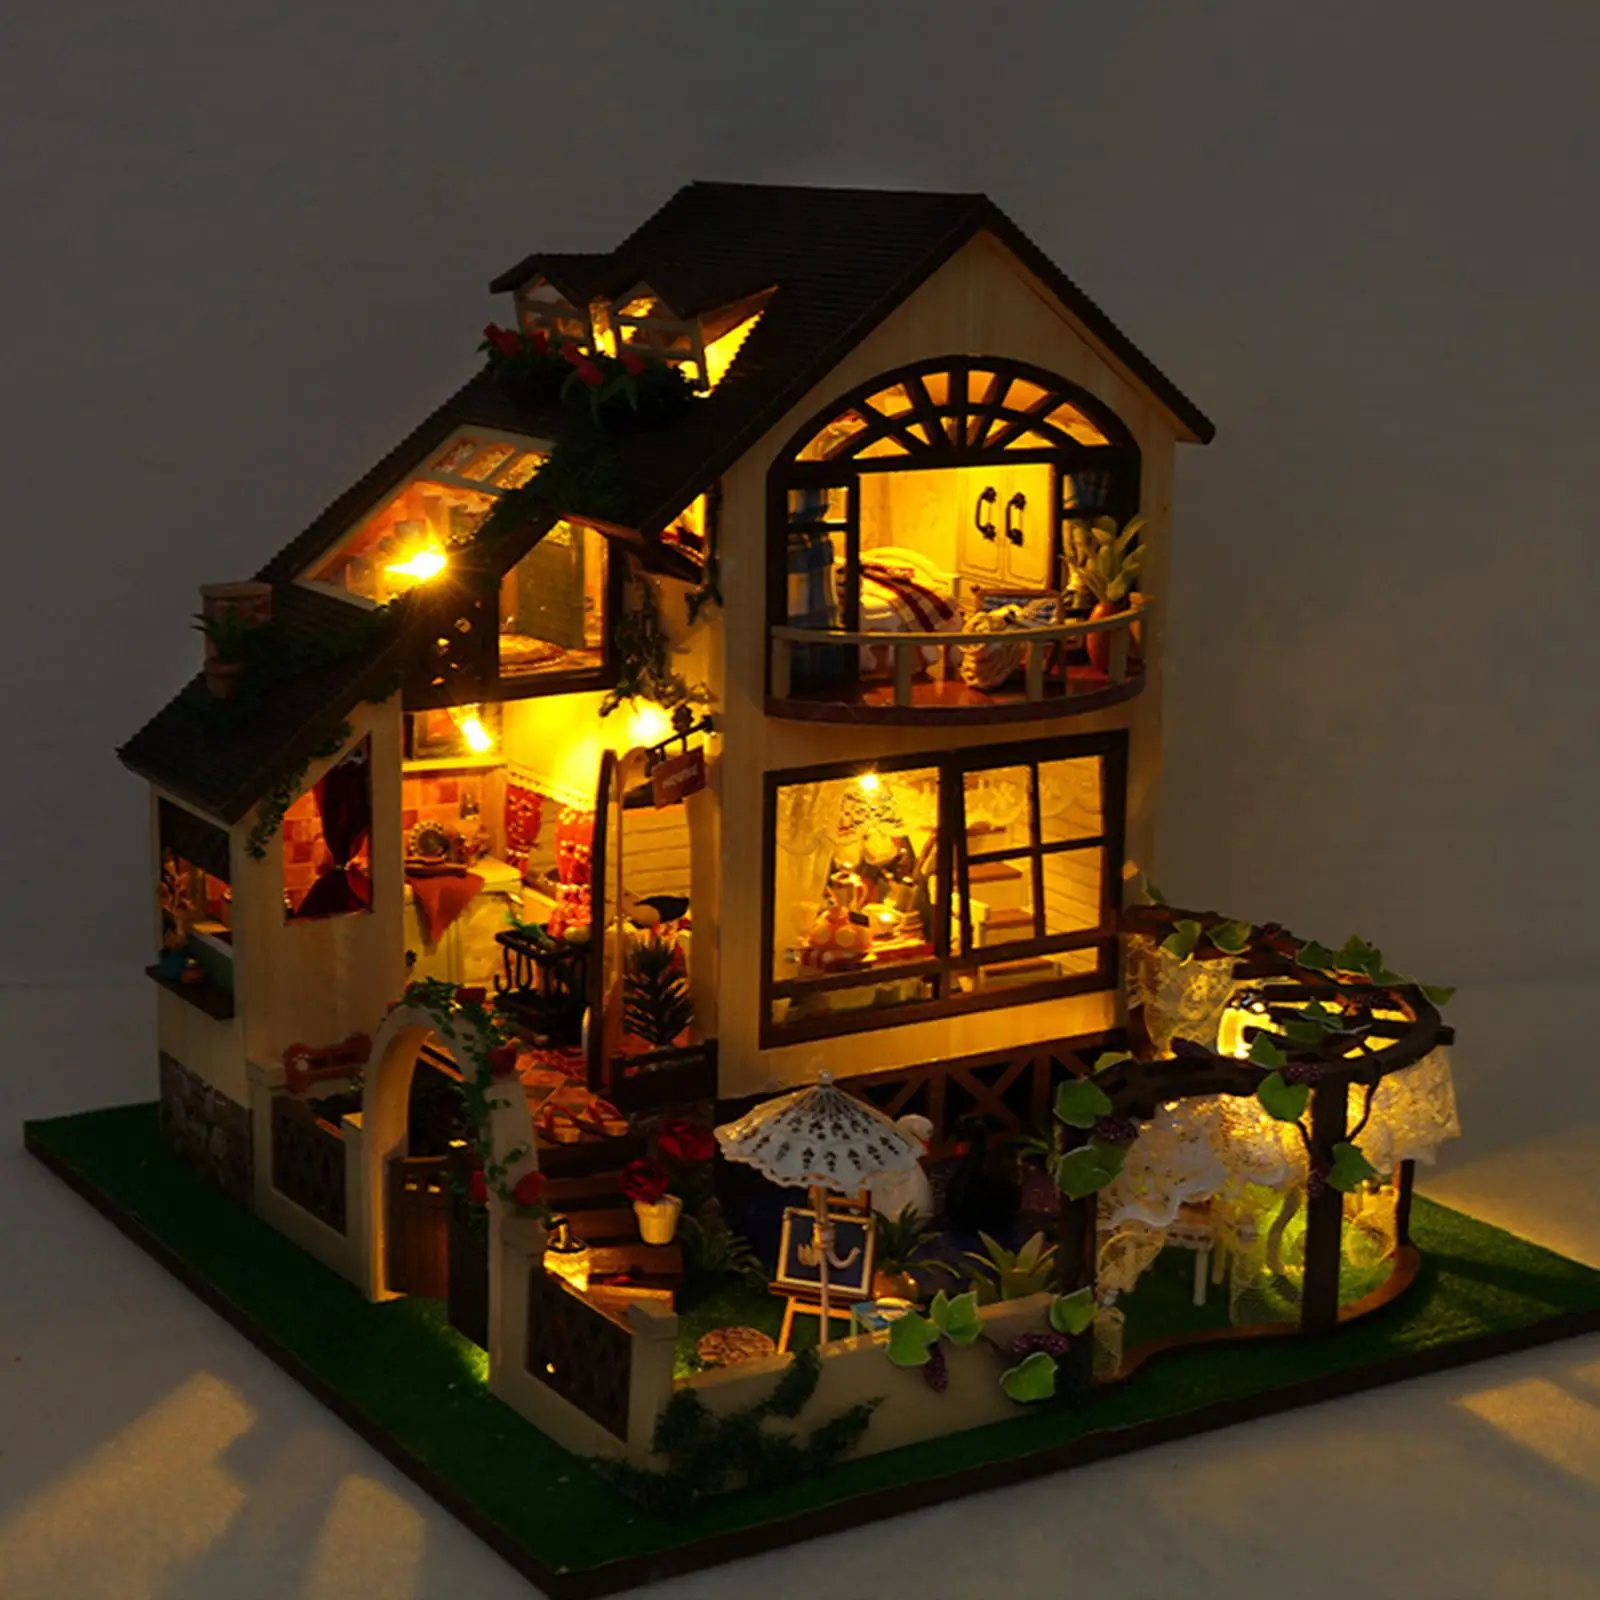 DIY Wooden Miniature Dollhouse DIY Crafts Decorations Handmade Doll House with Funiture for Friends Birthday Gift Adults Kids